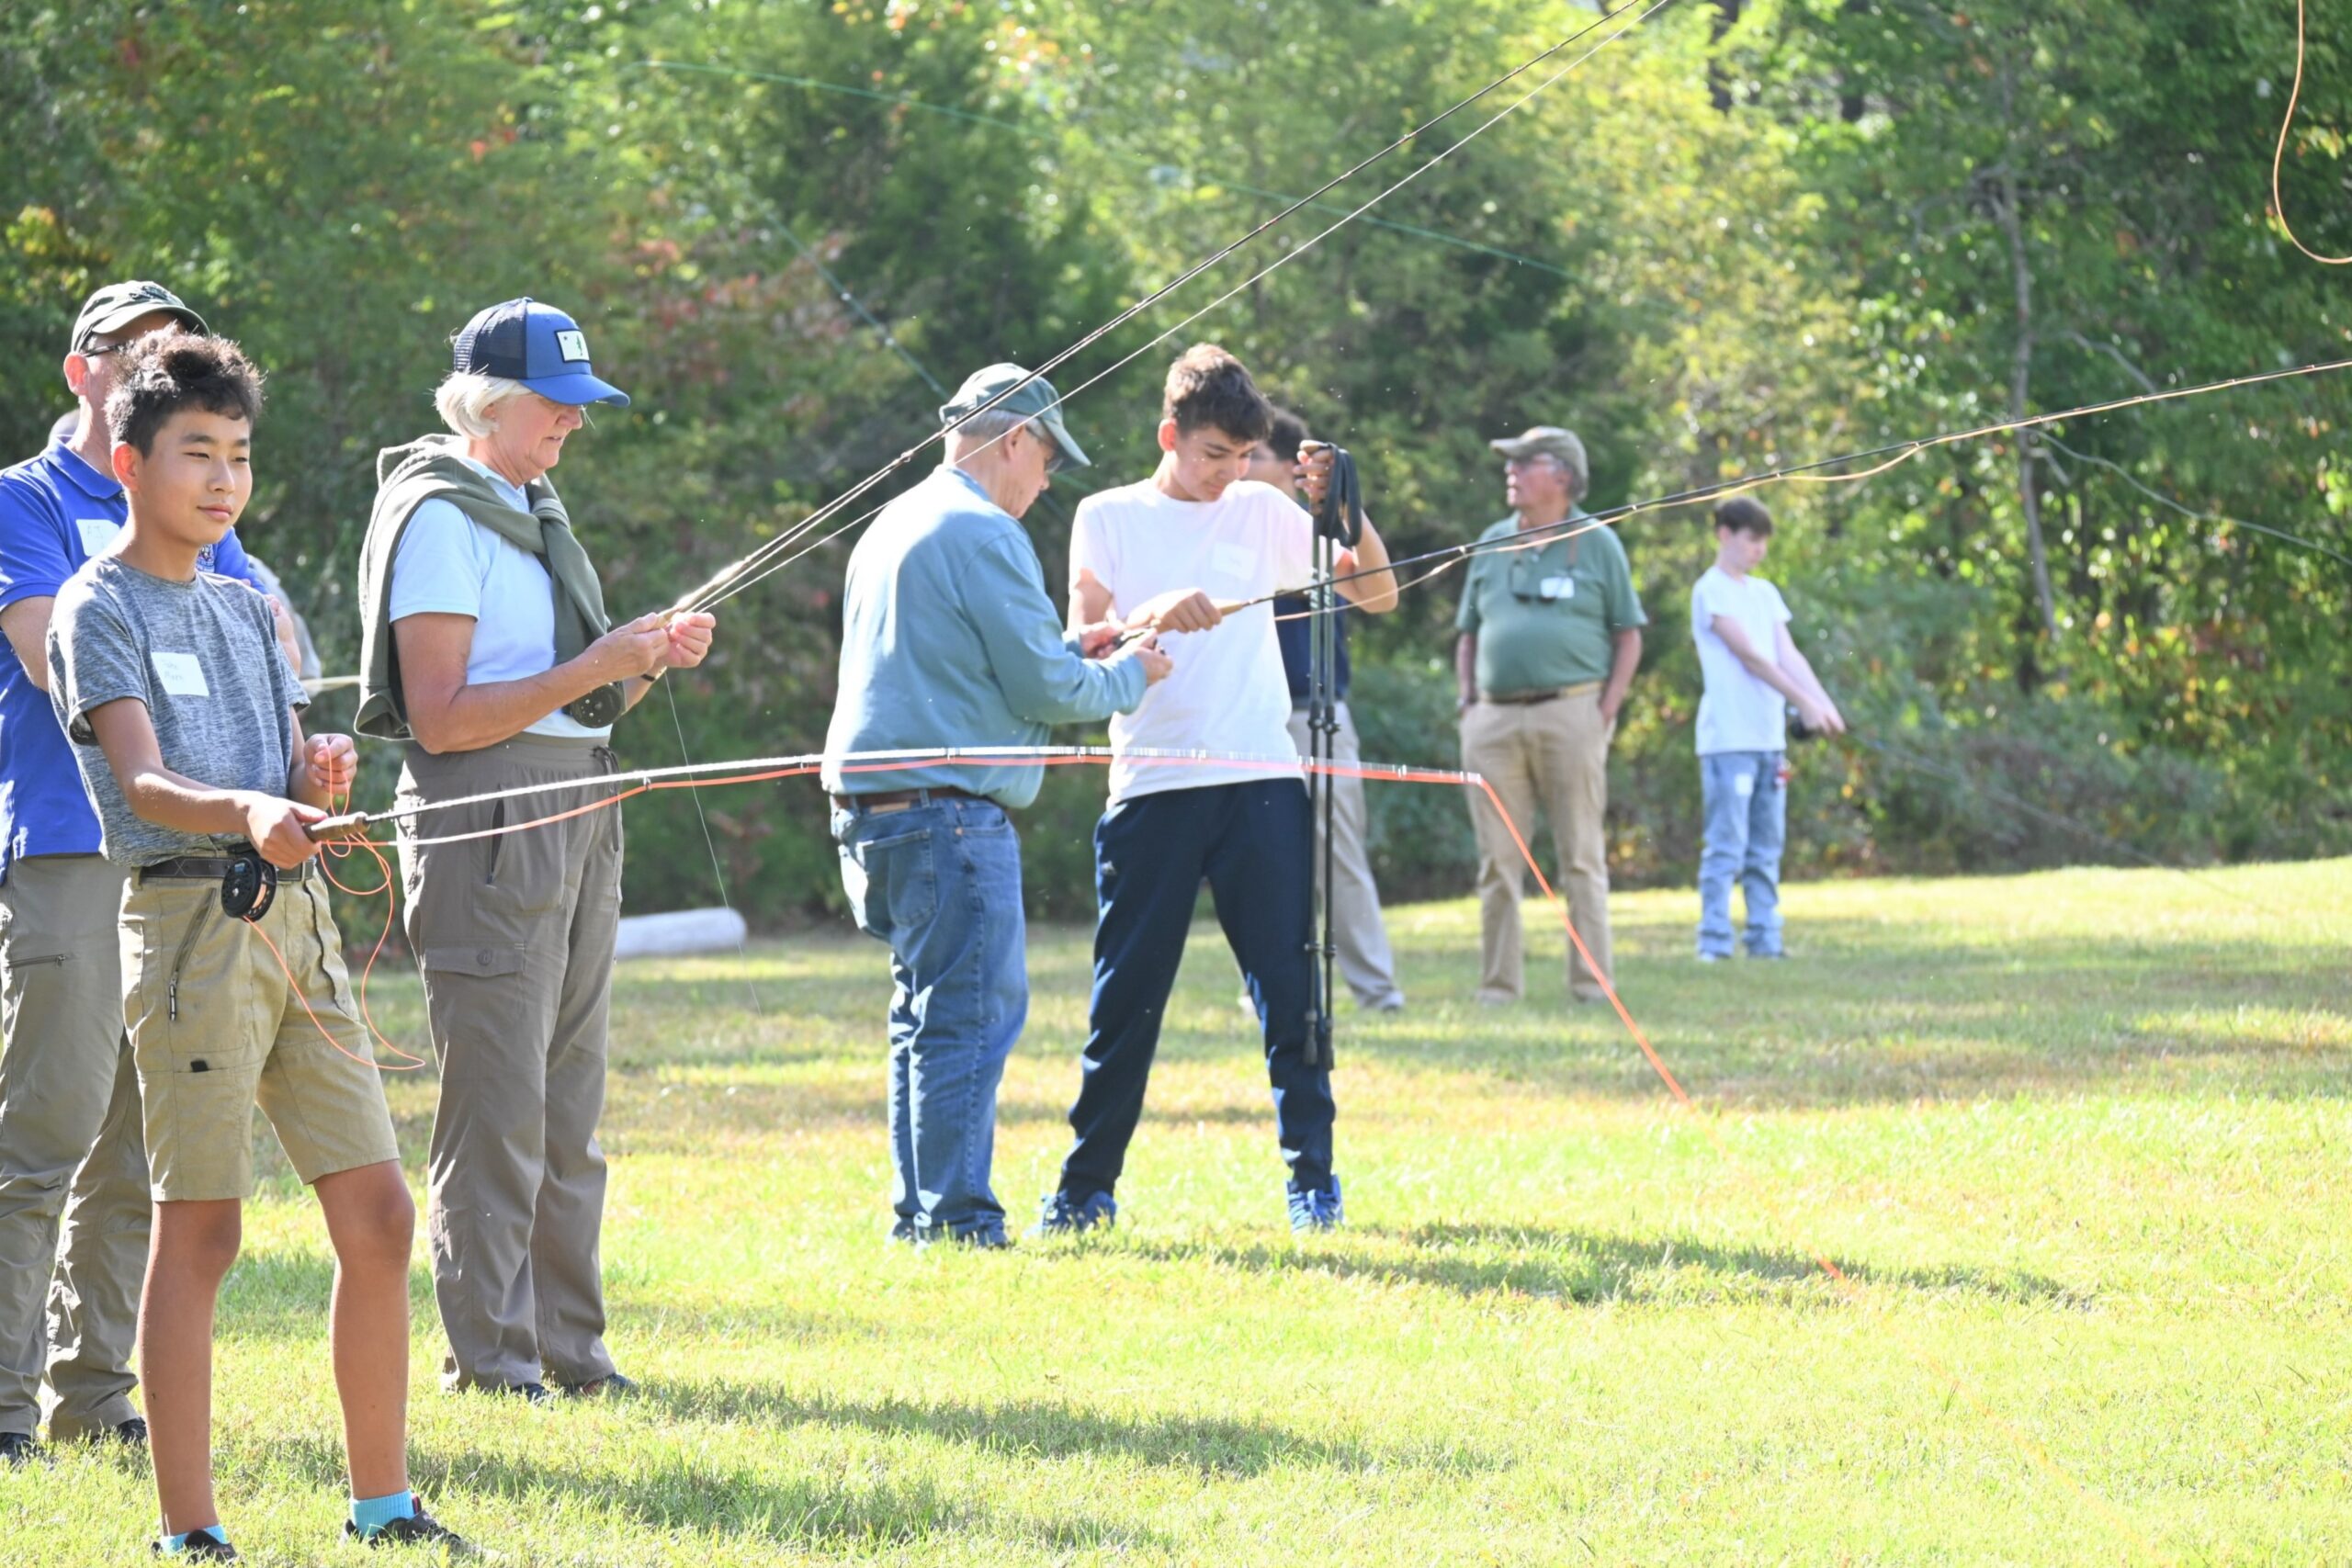  Fly Fishing Clinic Held At Boys Home By Trinity Episcopal Church 